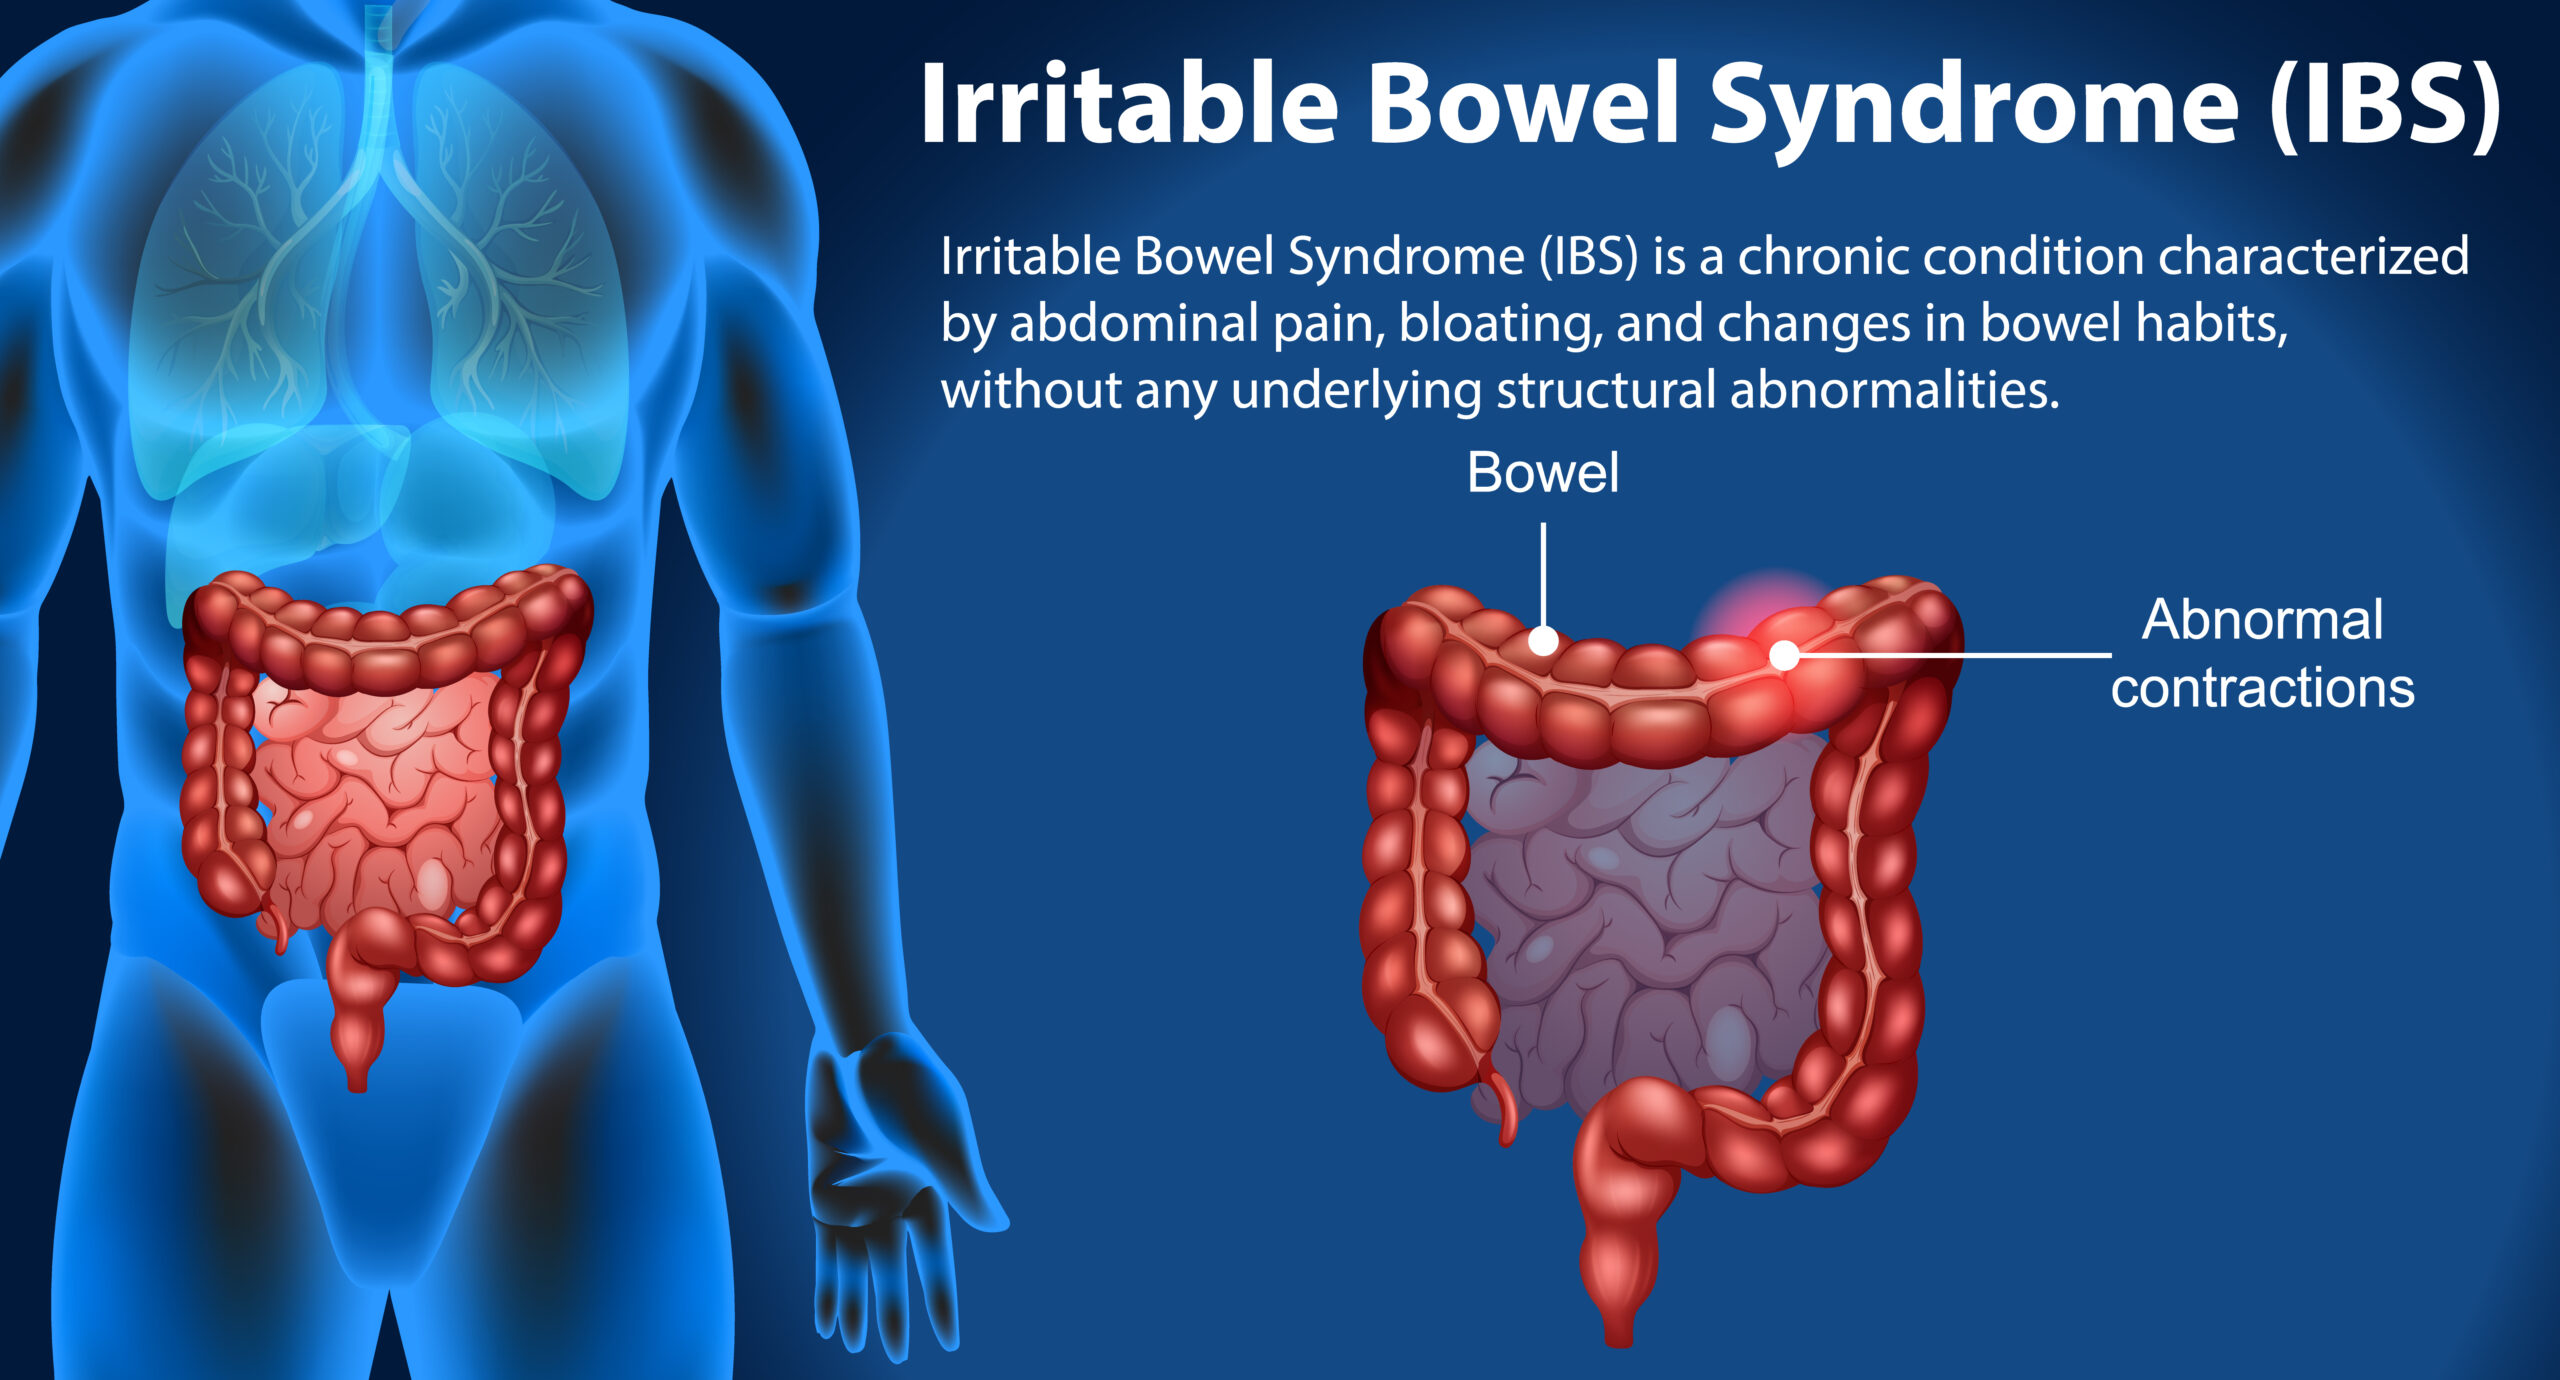 Irritable Bowel Syndrome (IBS): Causes, Symptoms, and Management